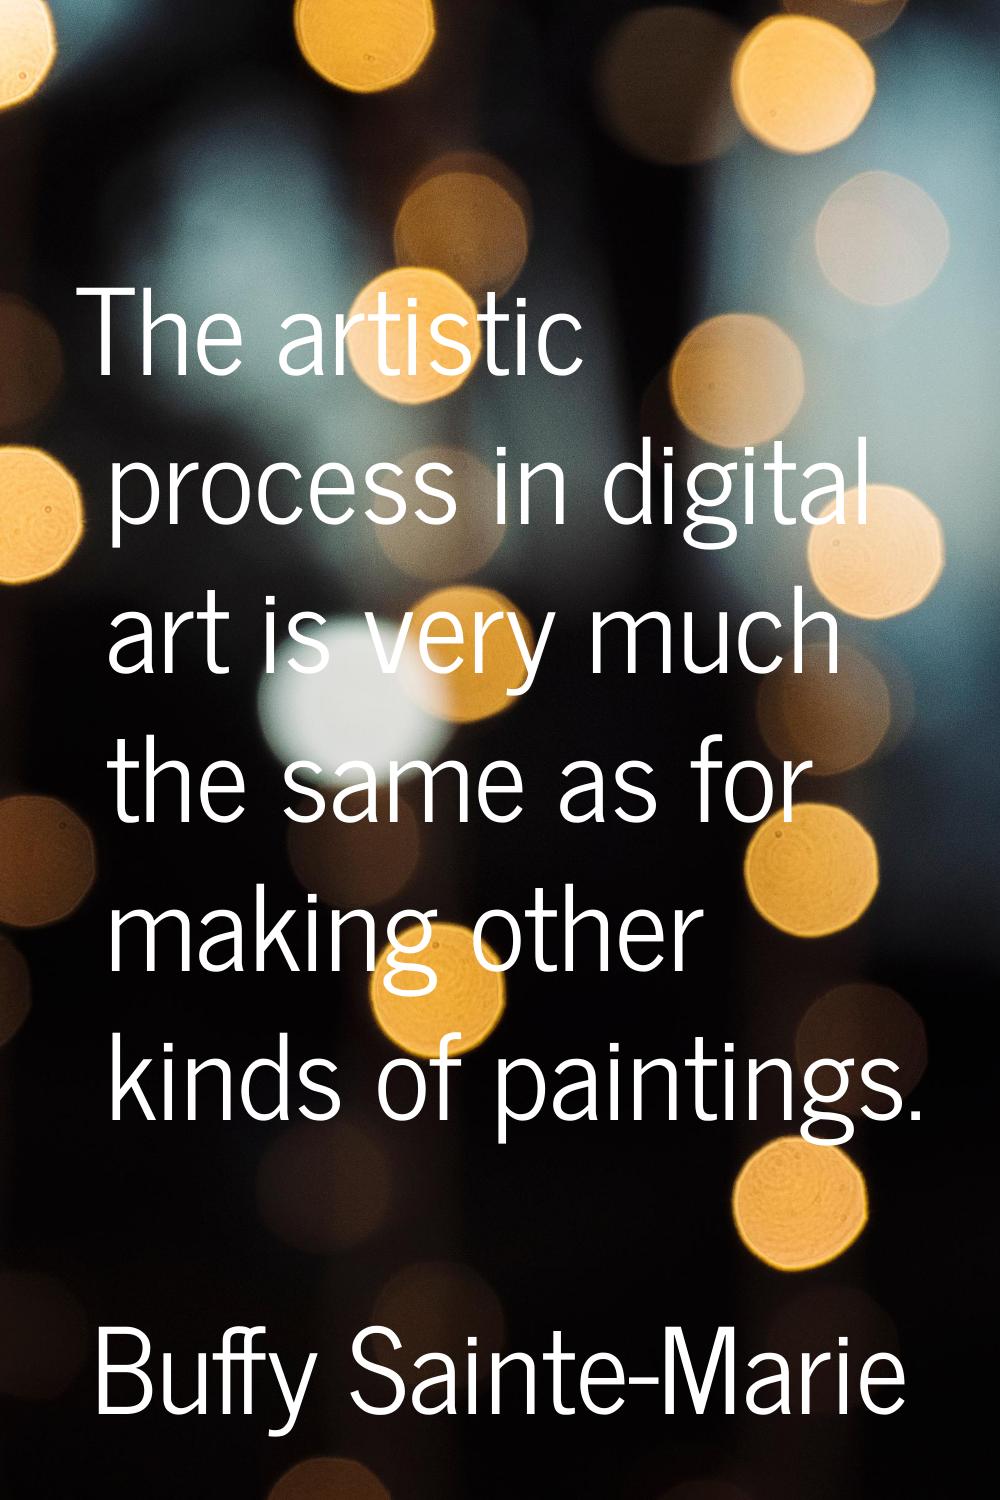 The artistic process in digital art is very much the same as for making other kinds of paintings.